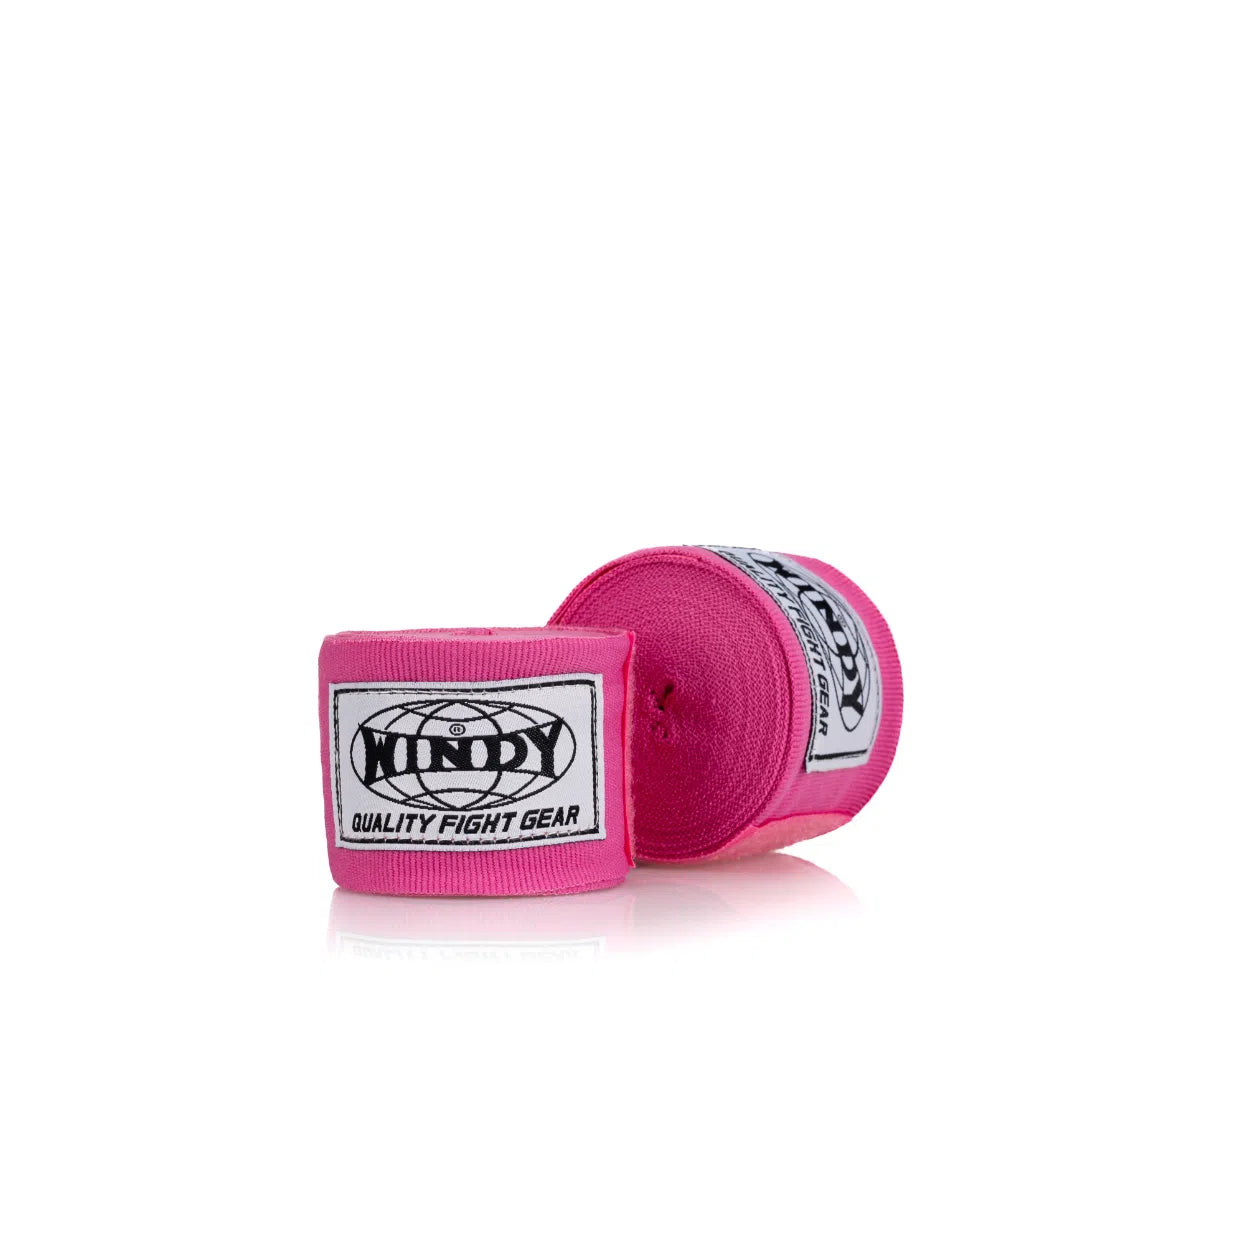 Windy Hand Wraps - Pink